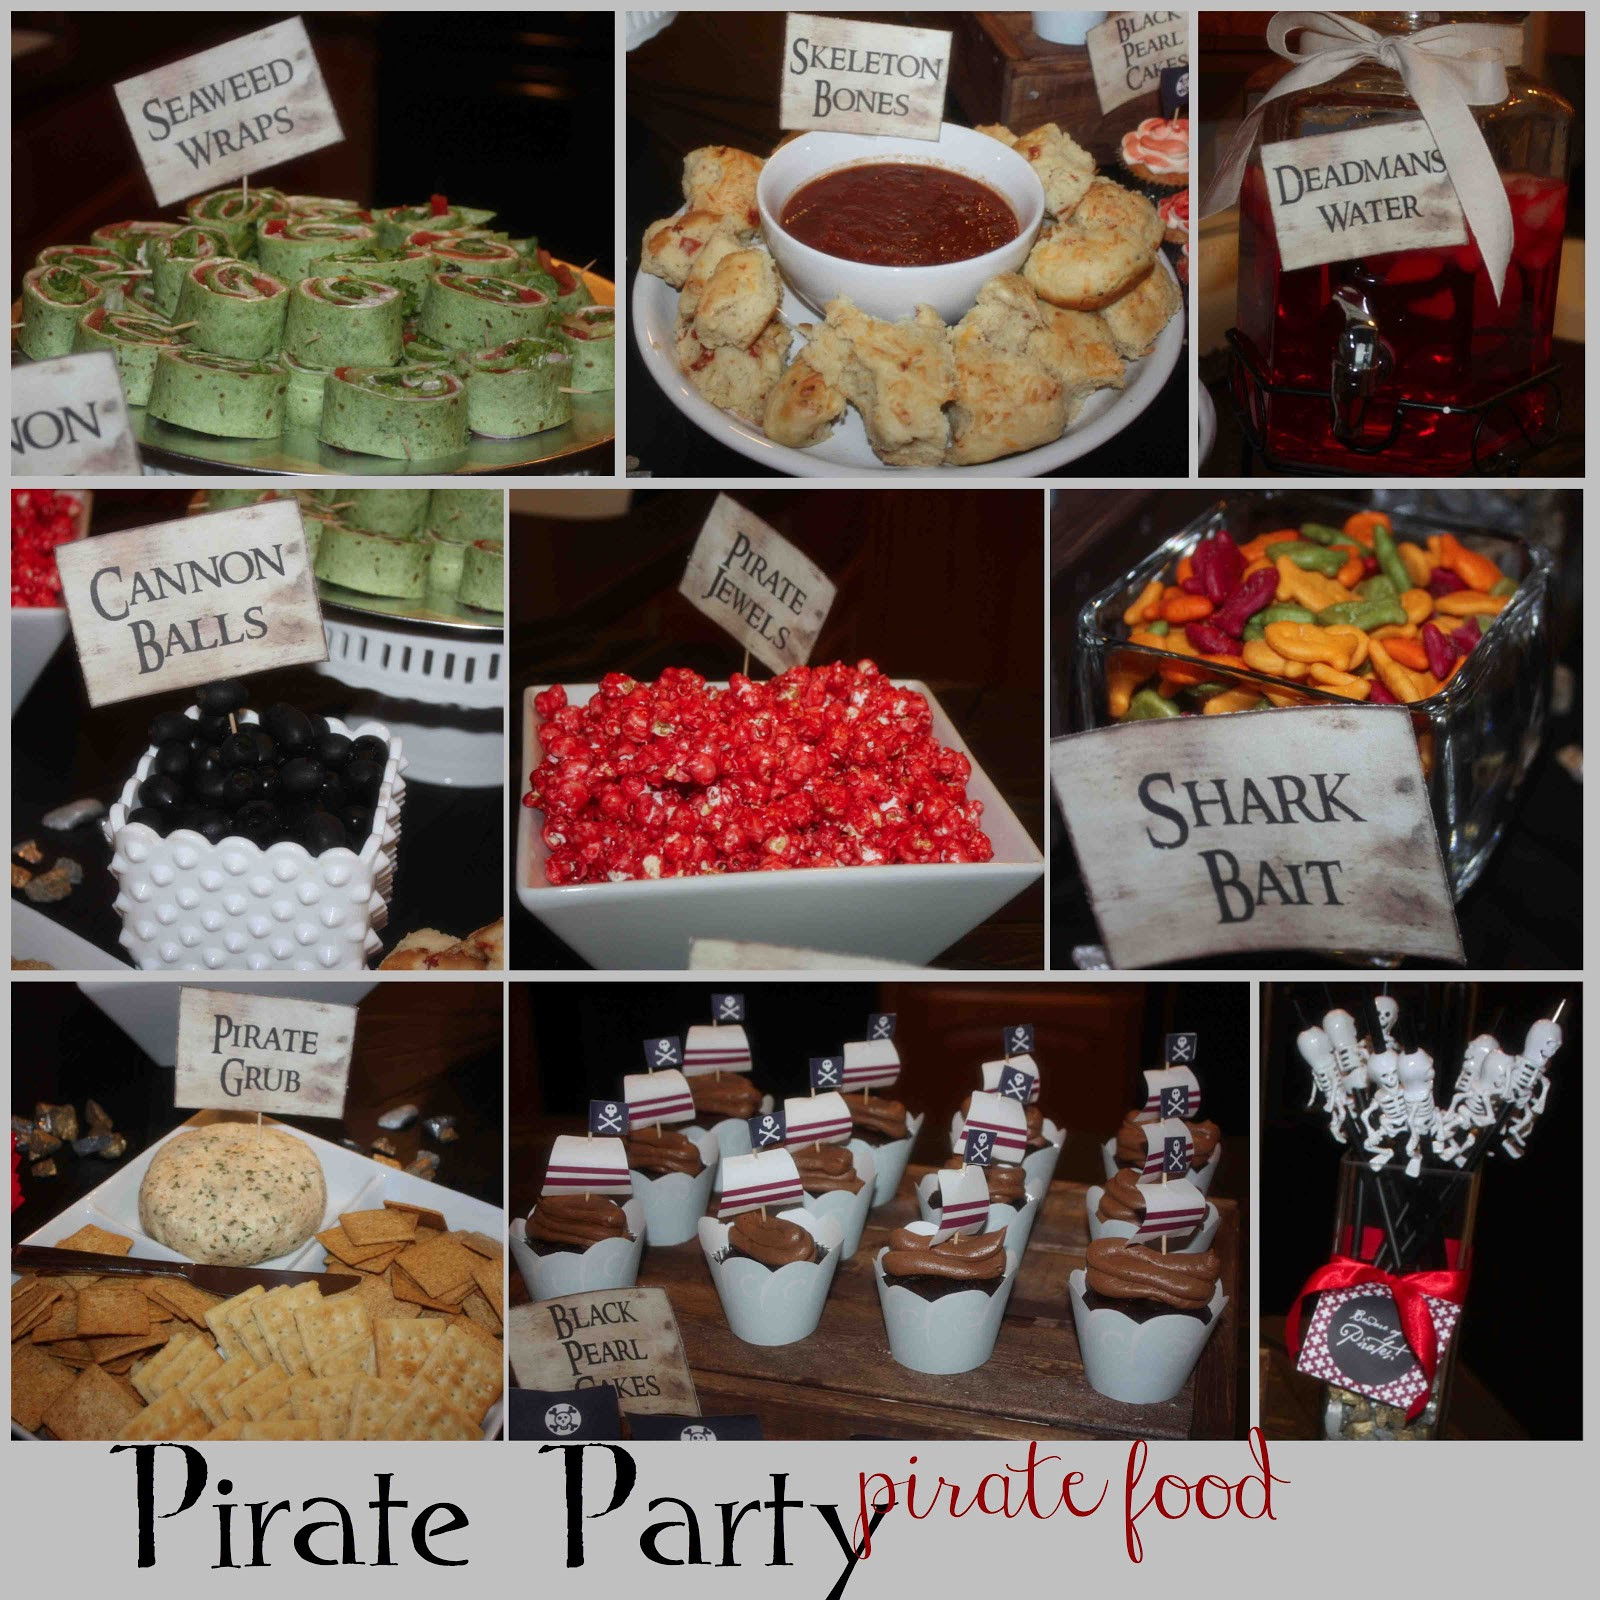 Pirate Birthday Party Food Ideas
 just Sweet and Simple Kids Pirate Party